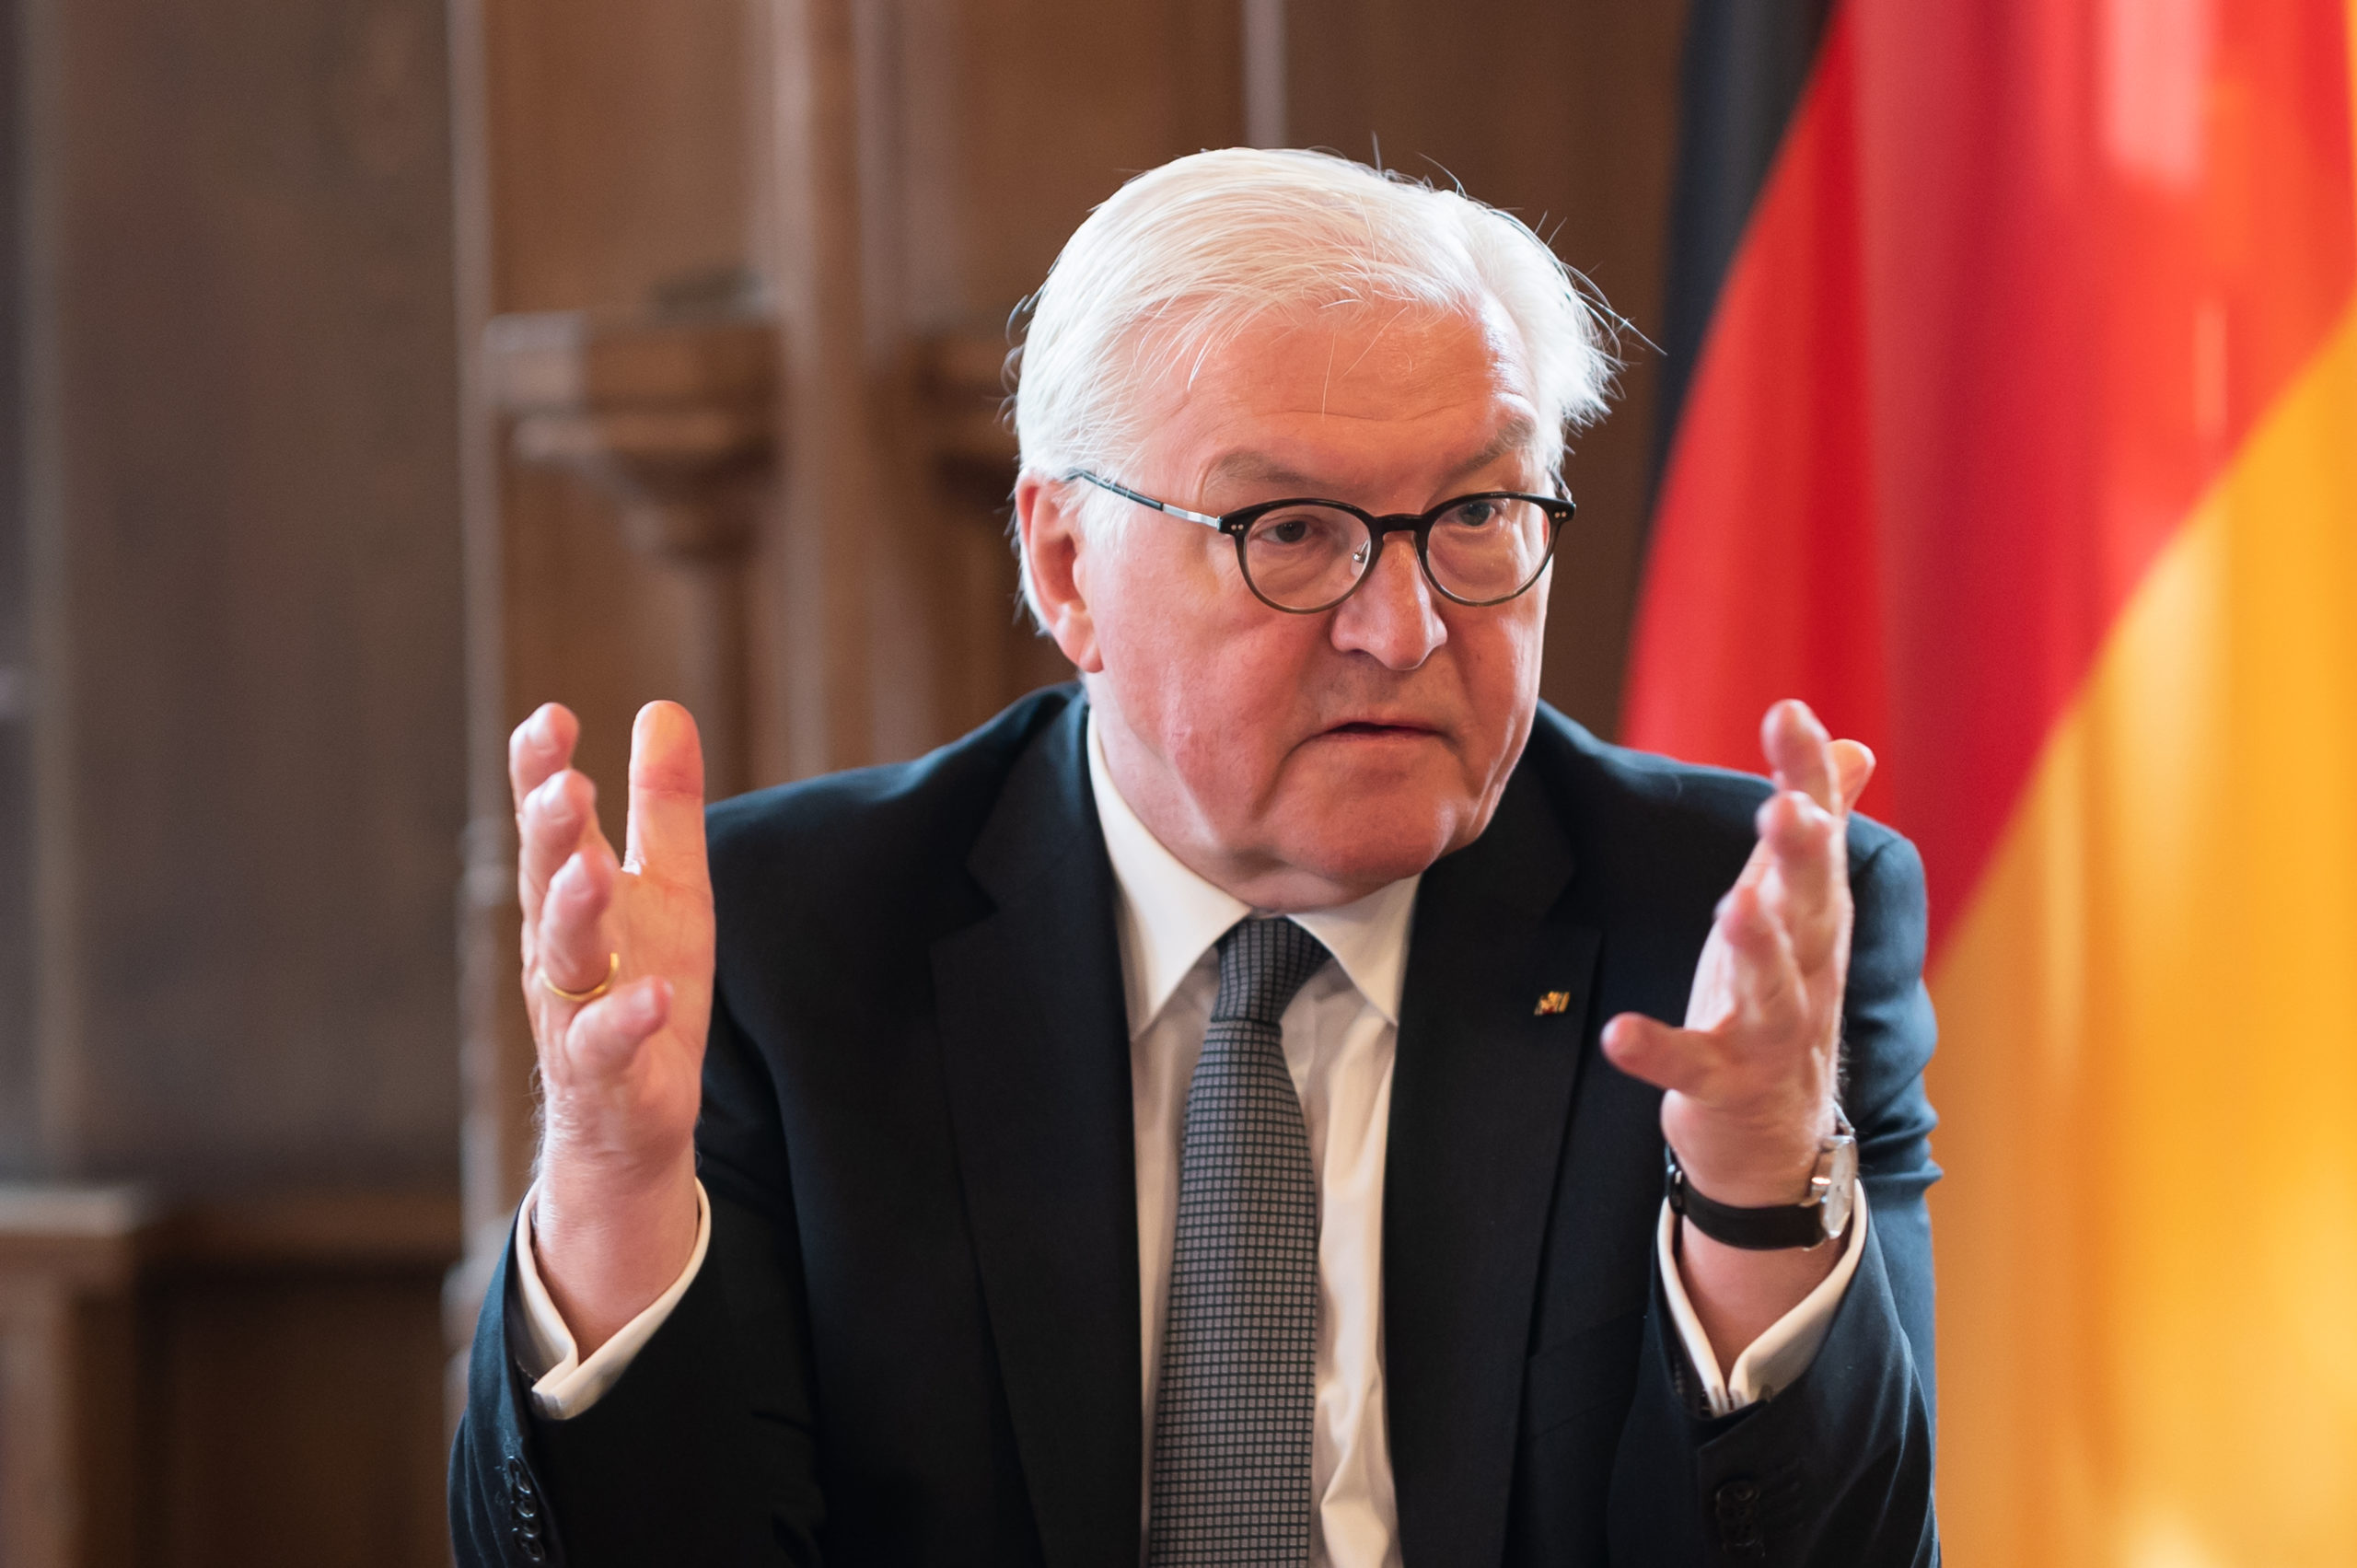 Federal President Frank-Walter Steinmeier meets with local politicians in the Old Town Hall in Rottweil.